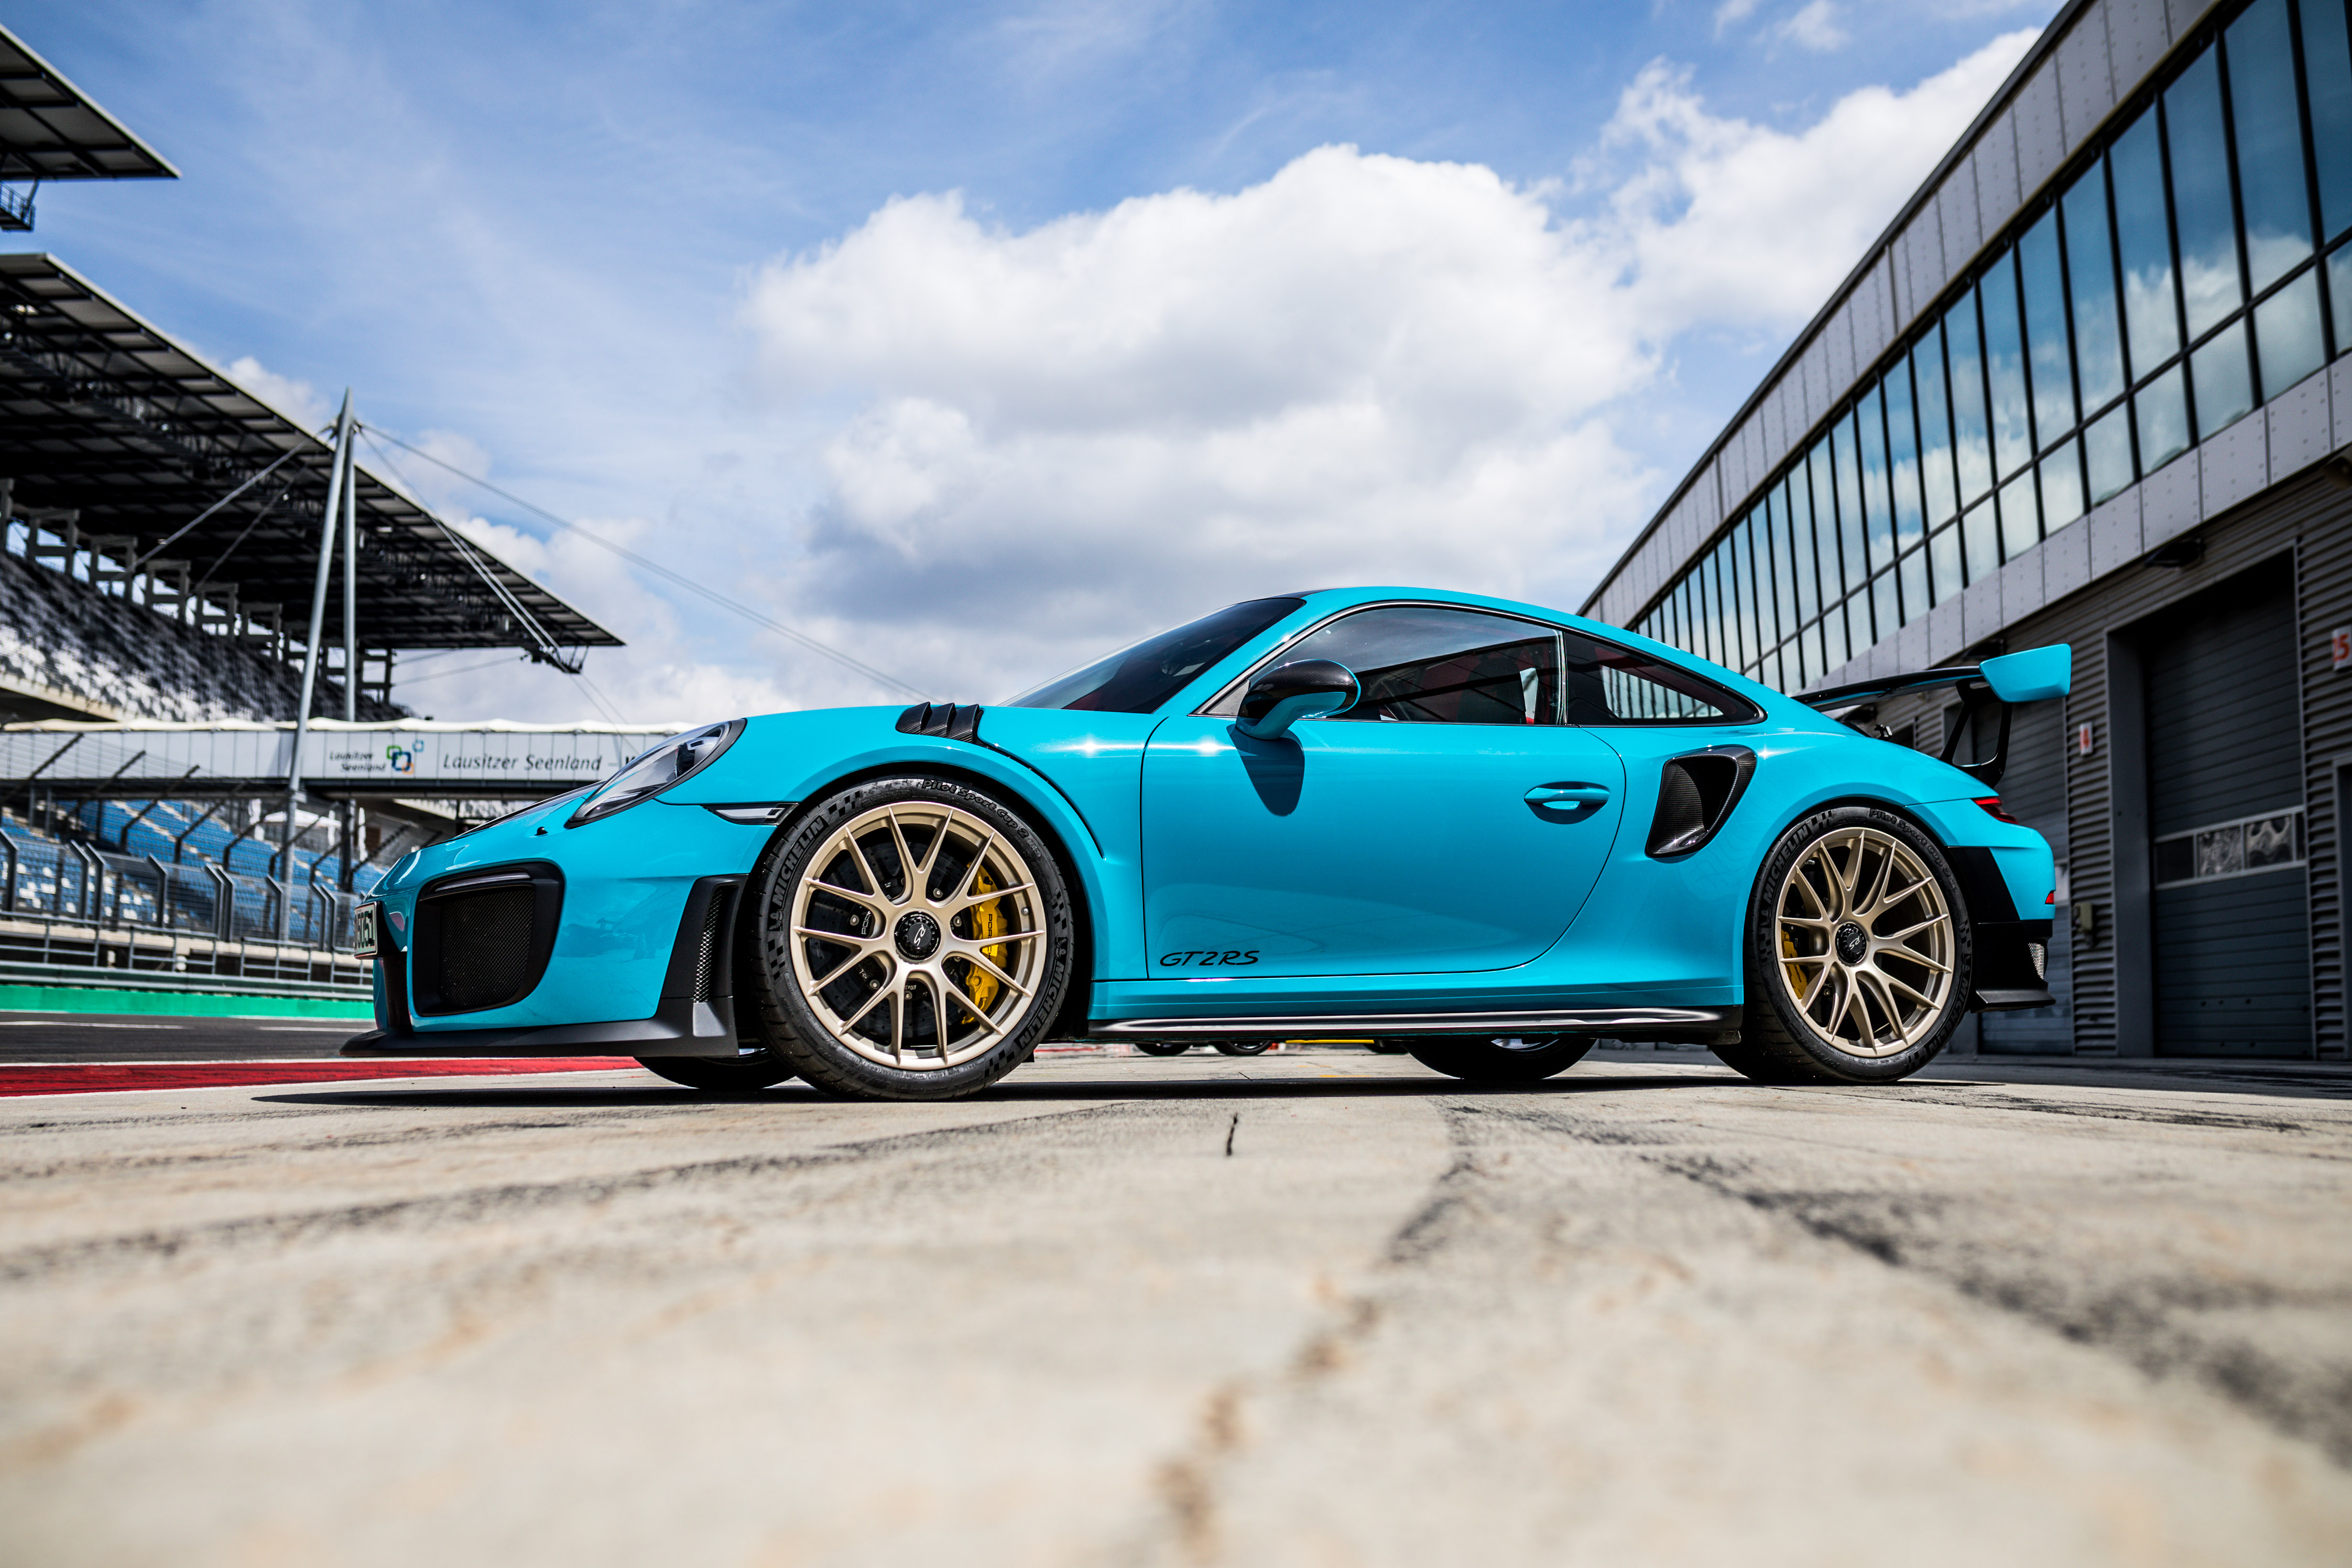 Porsche 991 911 GT2 RS parked at a race track